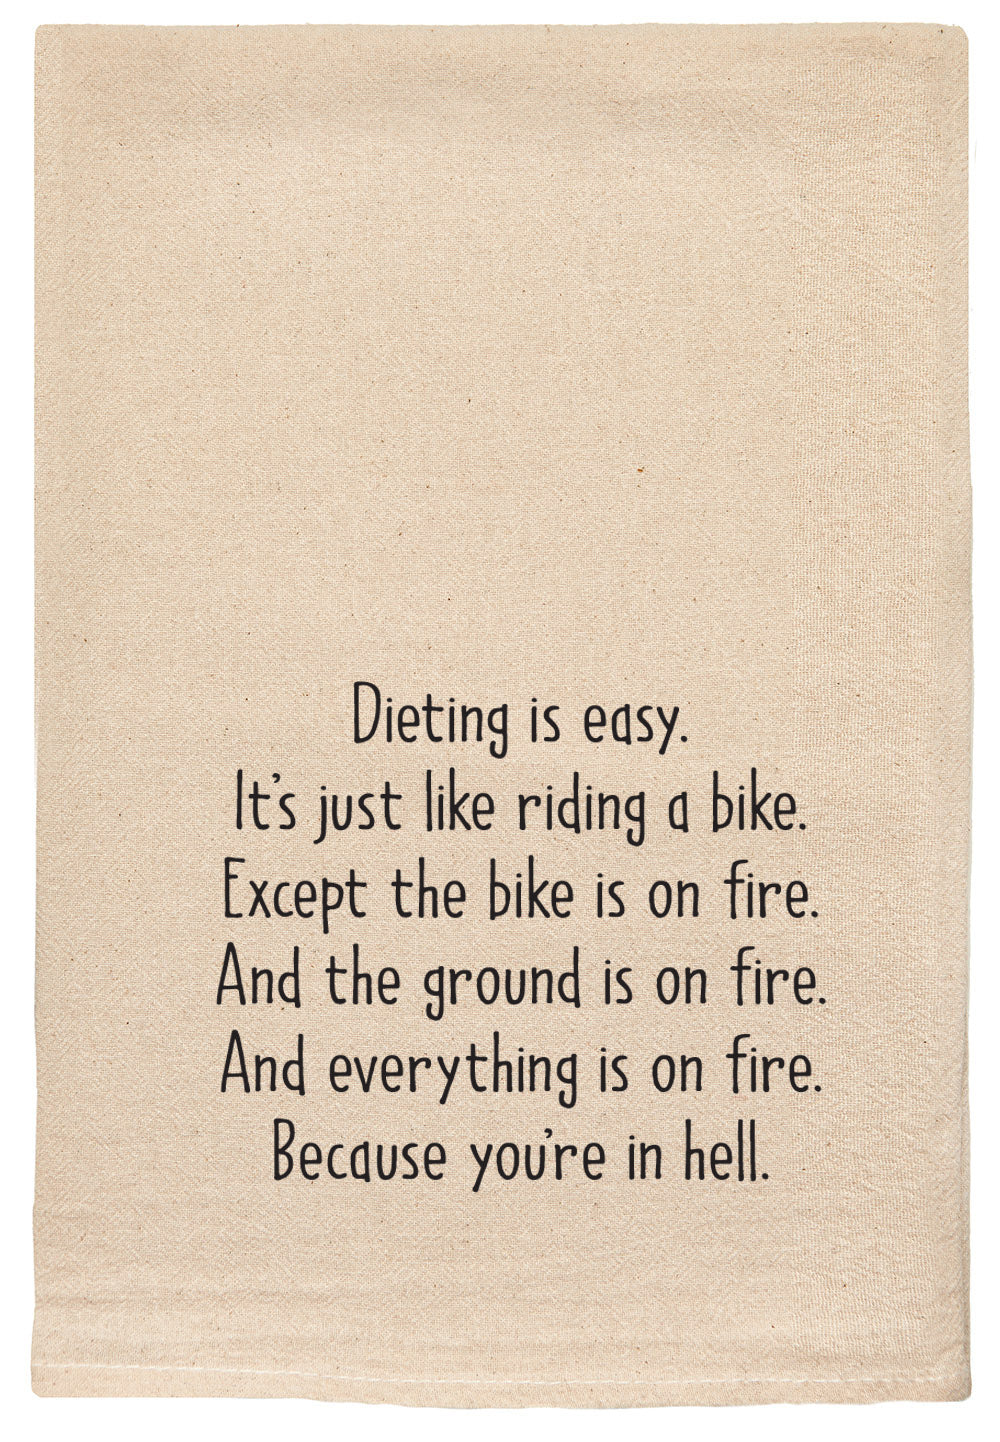 Dieting is easy ... everything is on fire, because you're in hell